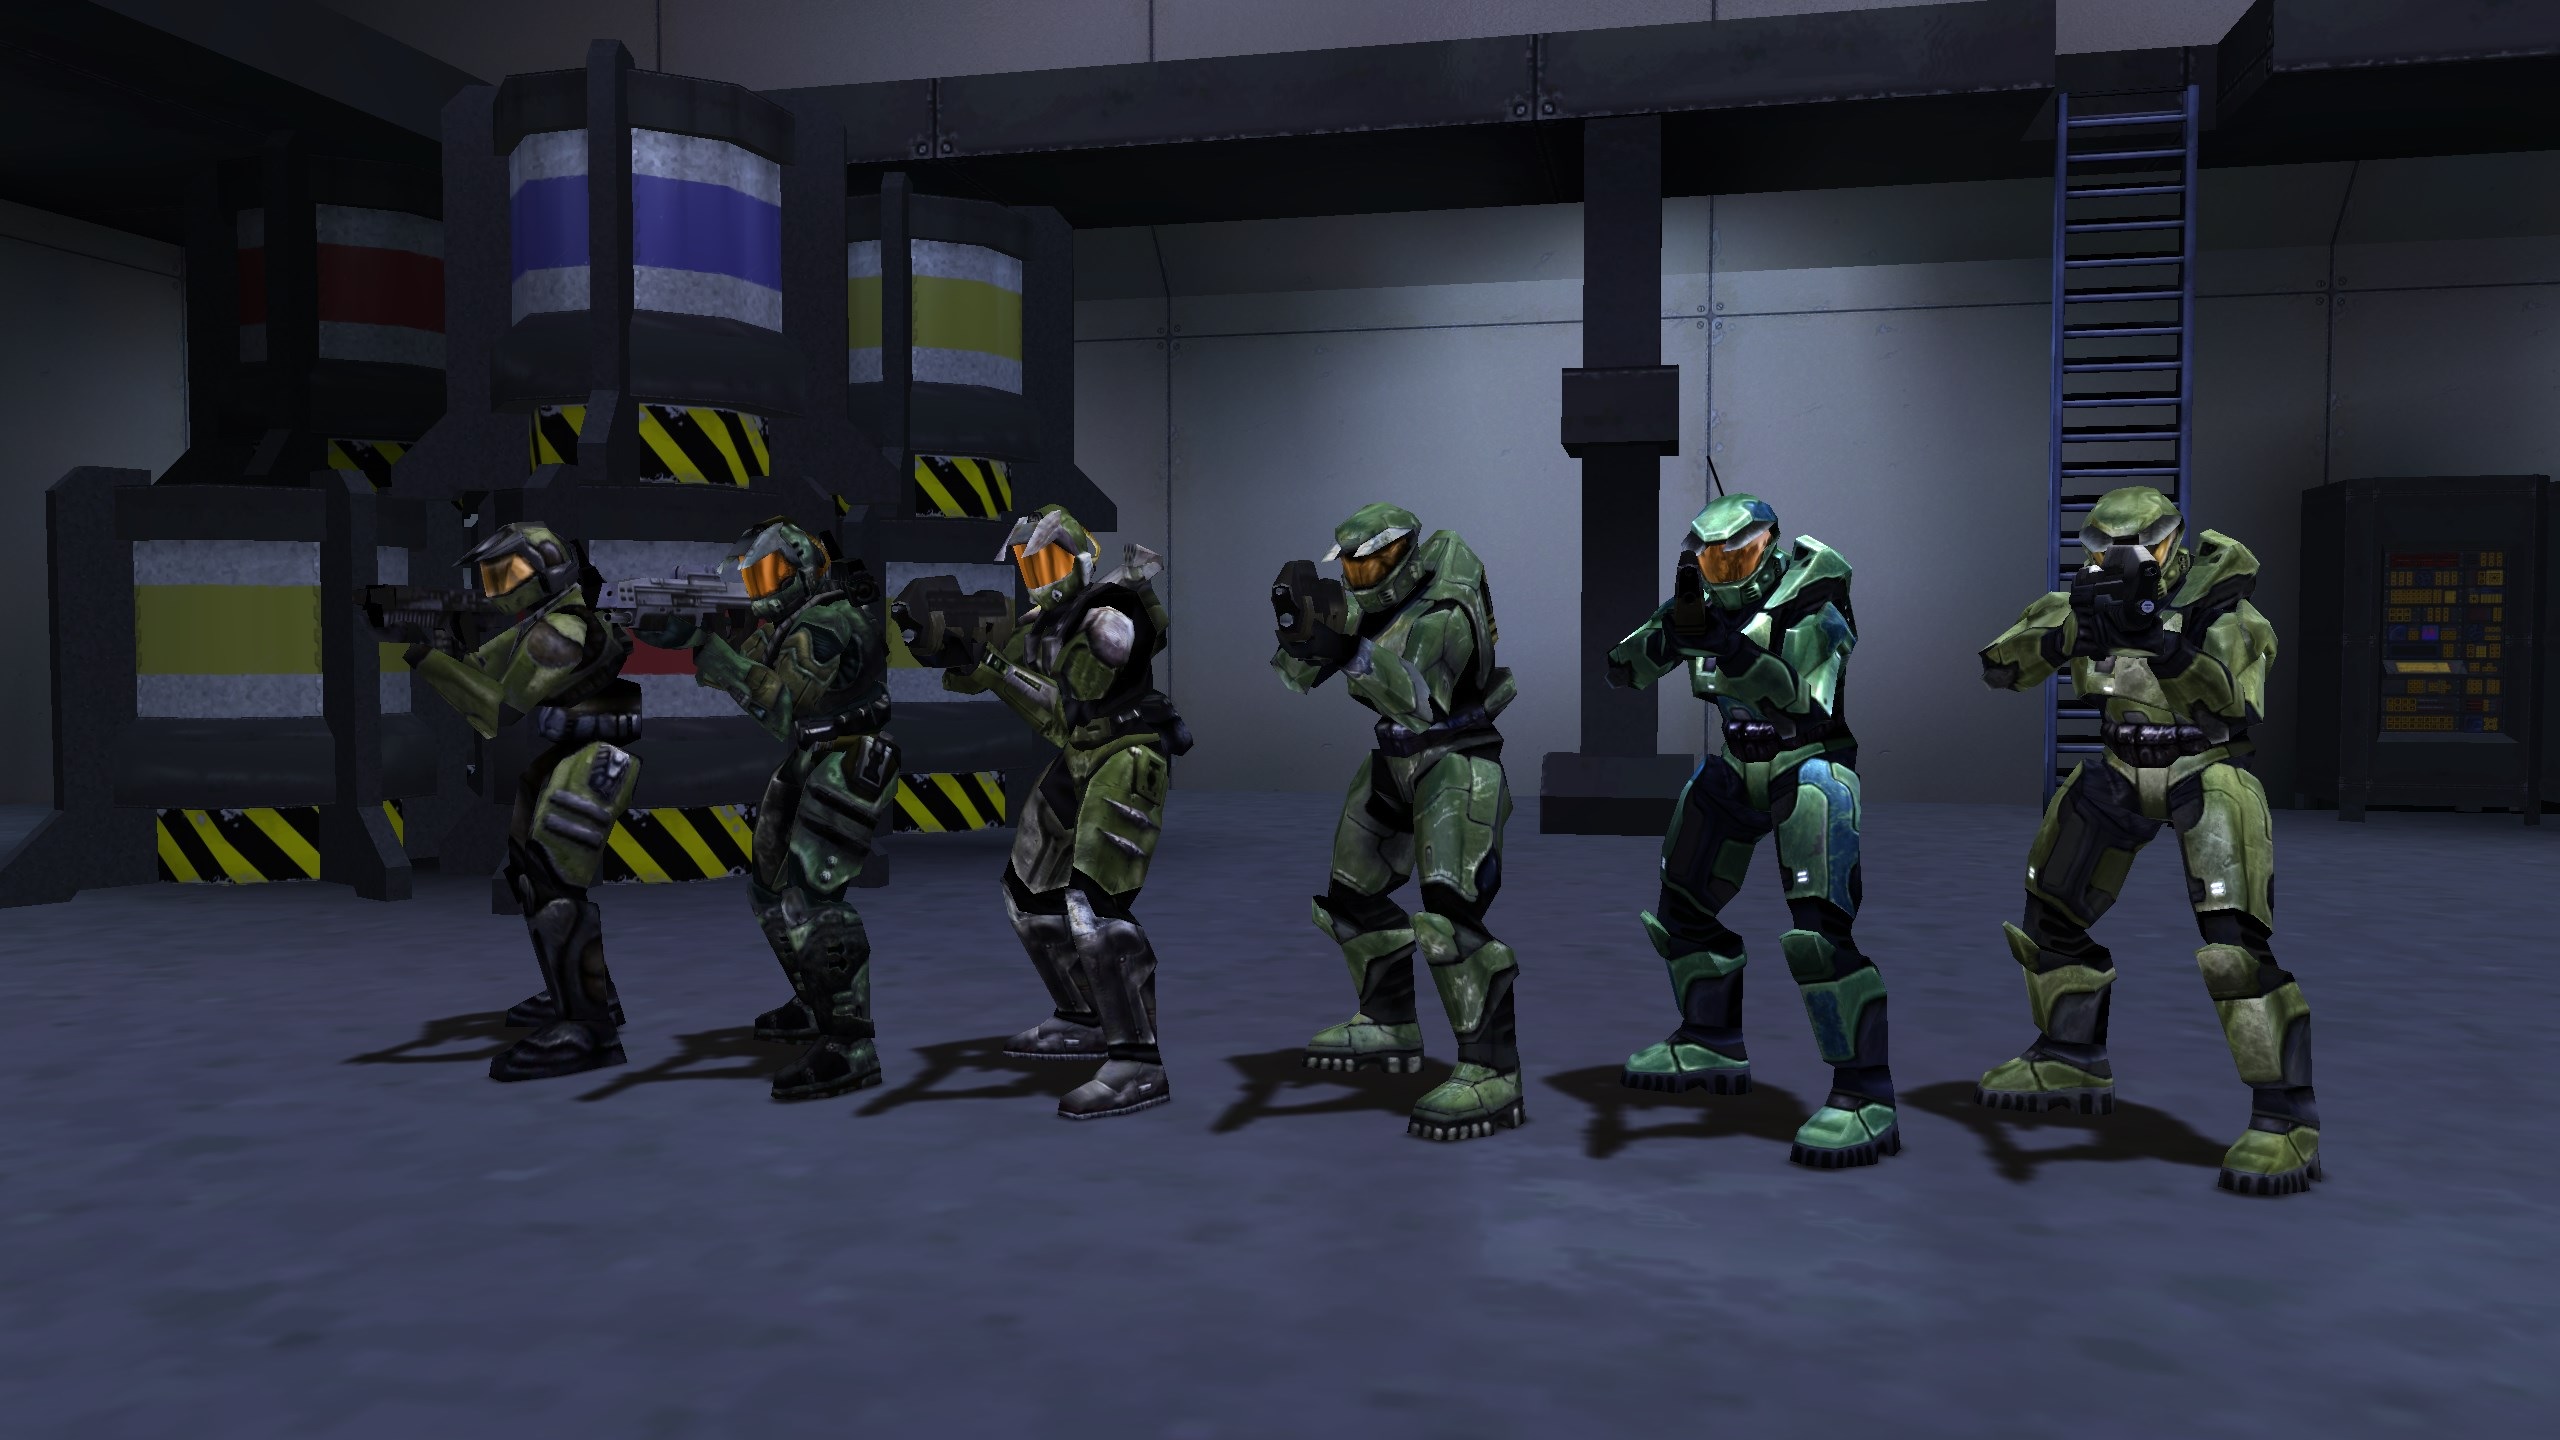 Line-up of Spartan and 1999-era cyborg models